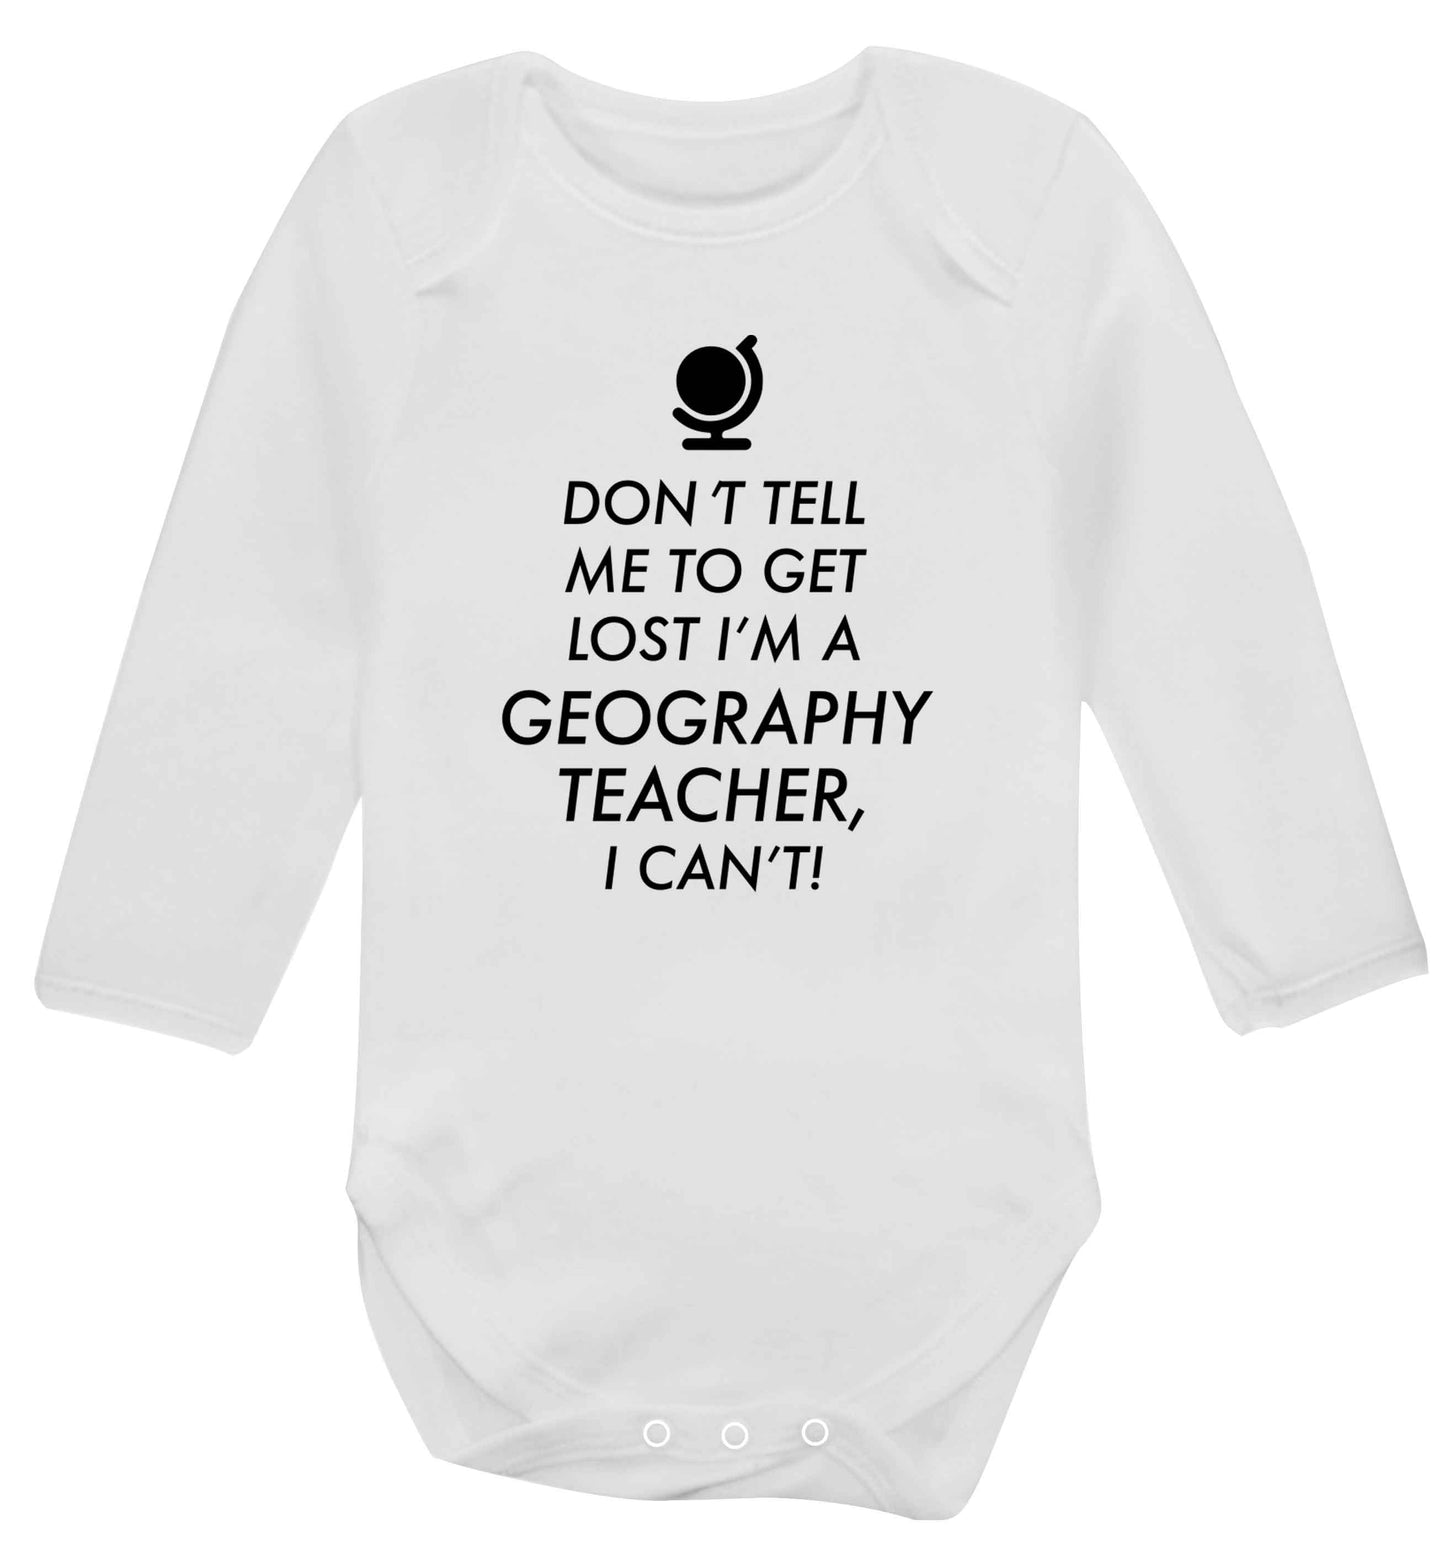 Don't tell me to get lost I'm a geography teacher, I can't Baby Vest long sleeved white 6-12 months